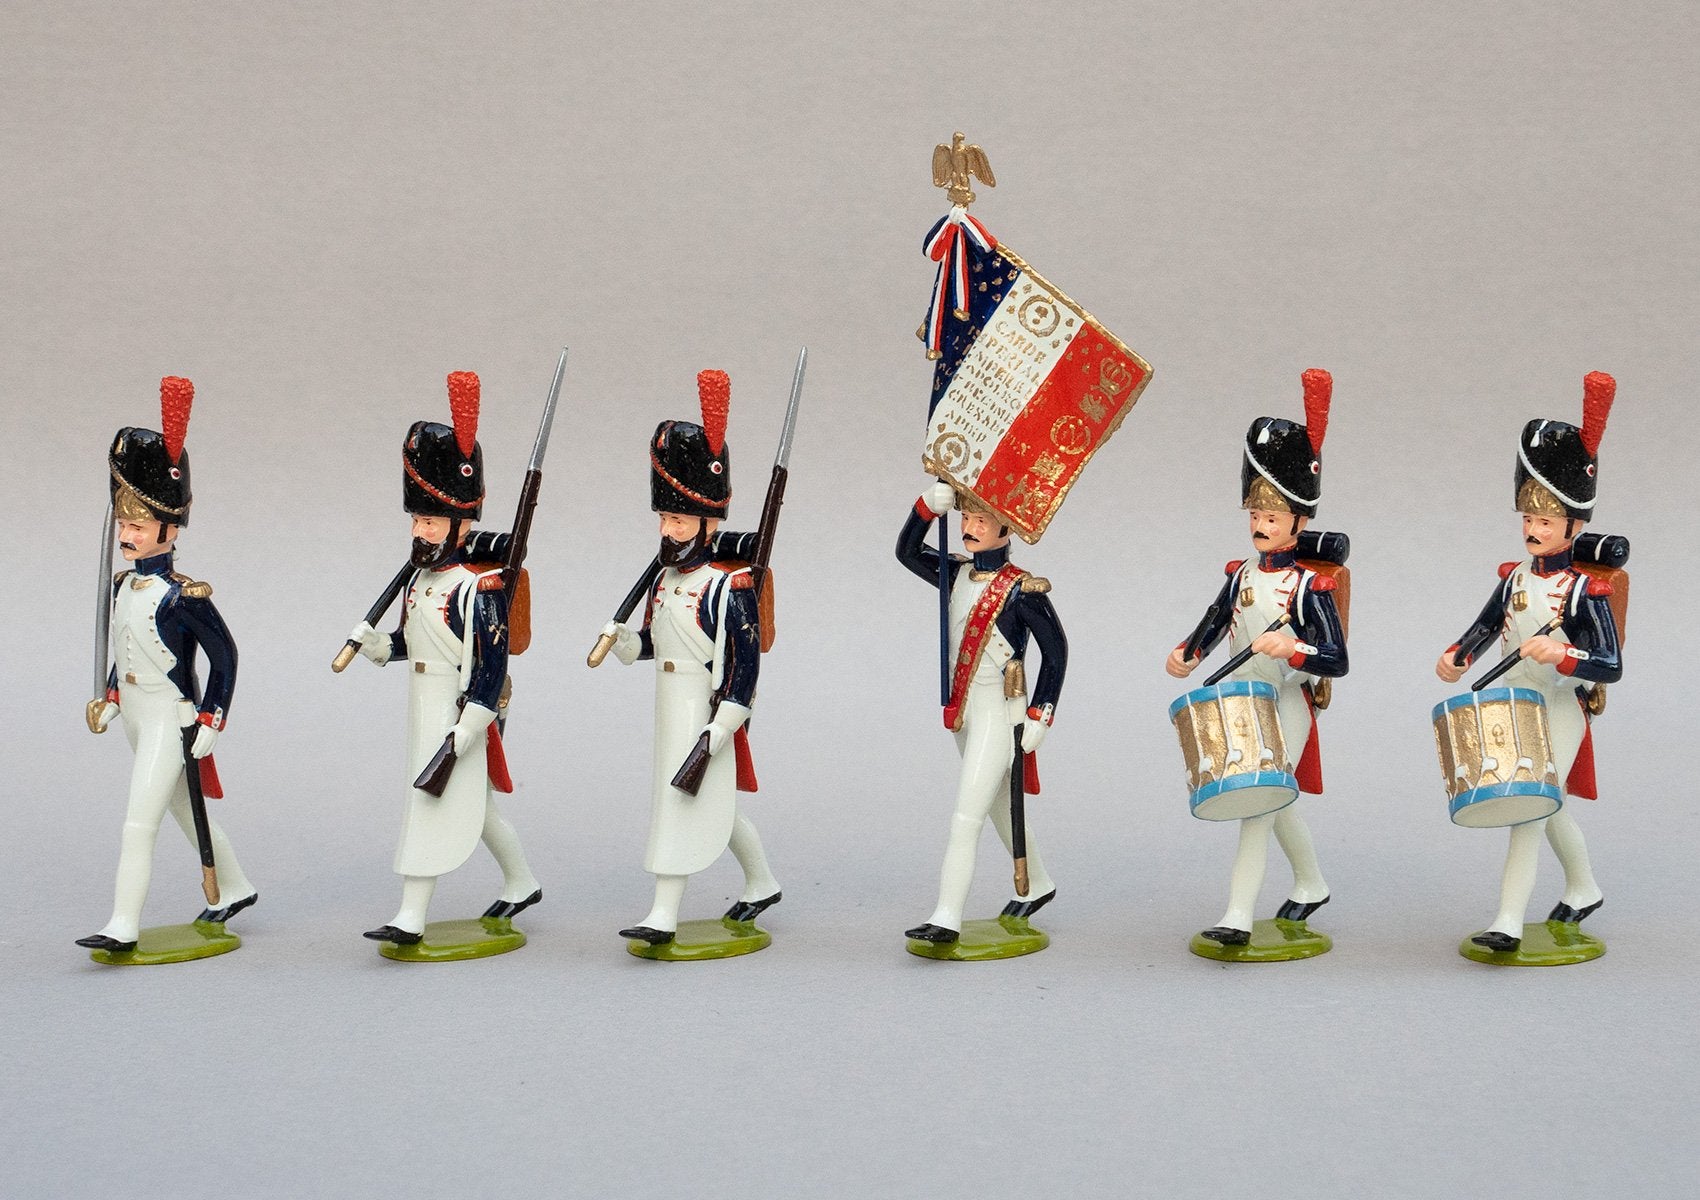 Set 110 Grenadiers à Pied, Head of Column, 1st Empire | French Infantry | Napoleonic Wars | Set of six men, one officer with sword, one ensign with colours and battle honours, two drummers and two pioneers marching | Waterloo | © Imperial Productions | Sculpt by David Cowe